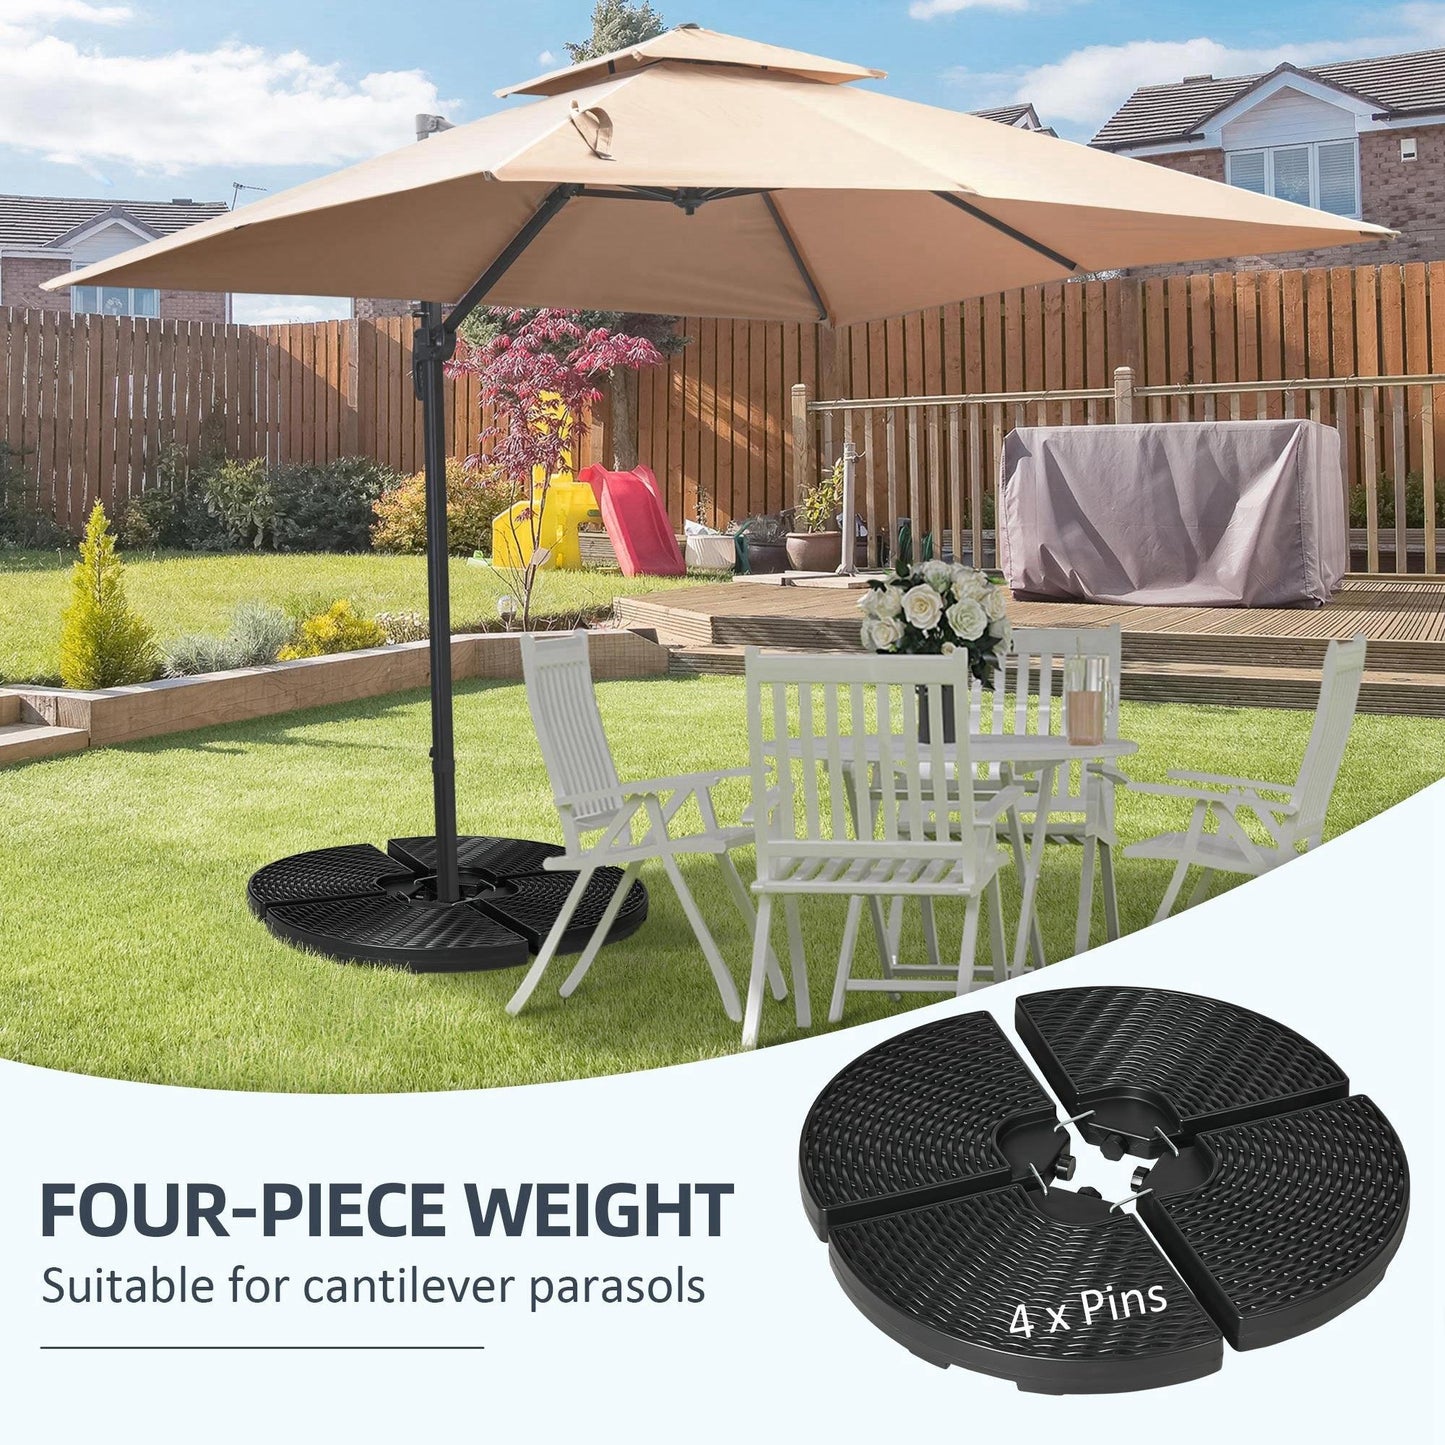 Outsunny 4PCs Parasol Bases, Patio Umbrella Weights for Parasol, Wicker Effect HDPE Water and Sand Filled Garden Umbrella Base with Built-in Handles, Black - ALL4U RETAILER LTD